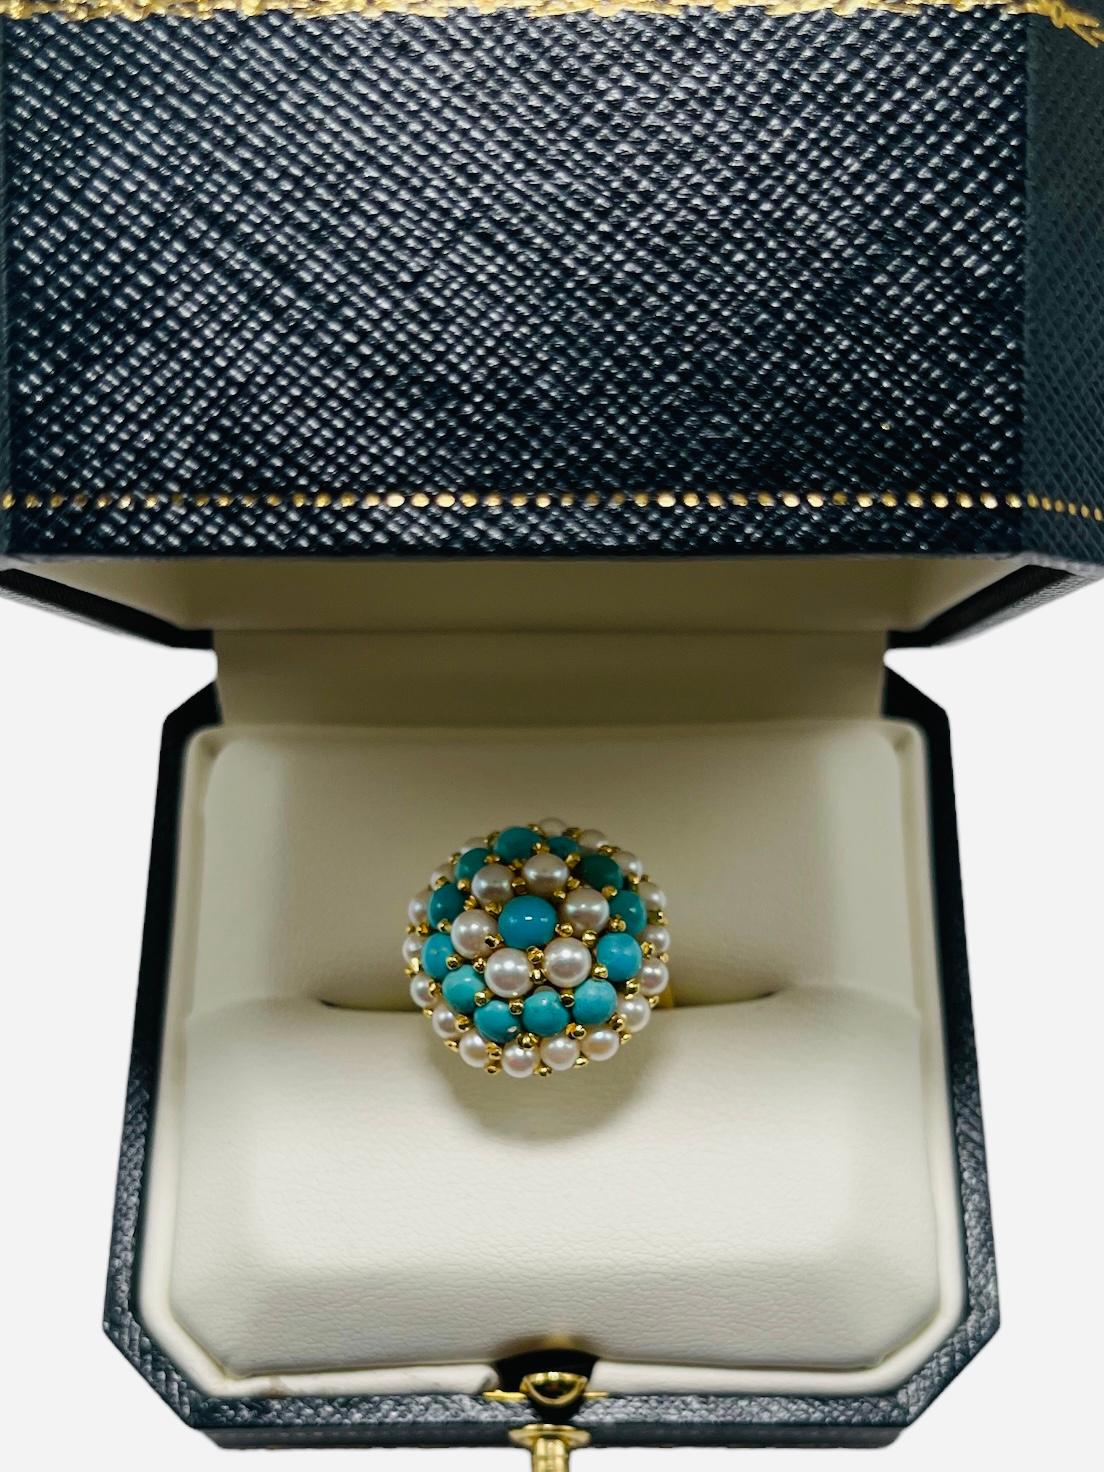 This is an 18K yellow gold Pearls and Turquoises dome cocktail ring. Its weight is 9.9 grams. There is a halo of eighteen small round pearls ( 3.4mm ) in prong setting arranged at the base followed by another halo of twelve small turquoise